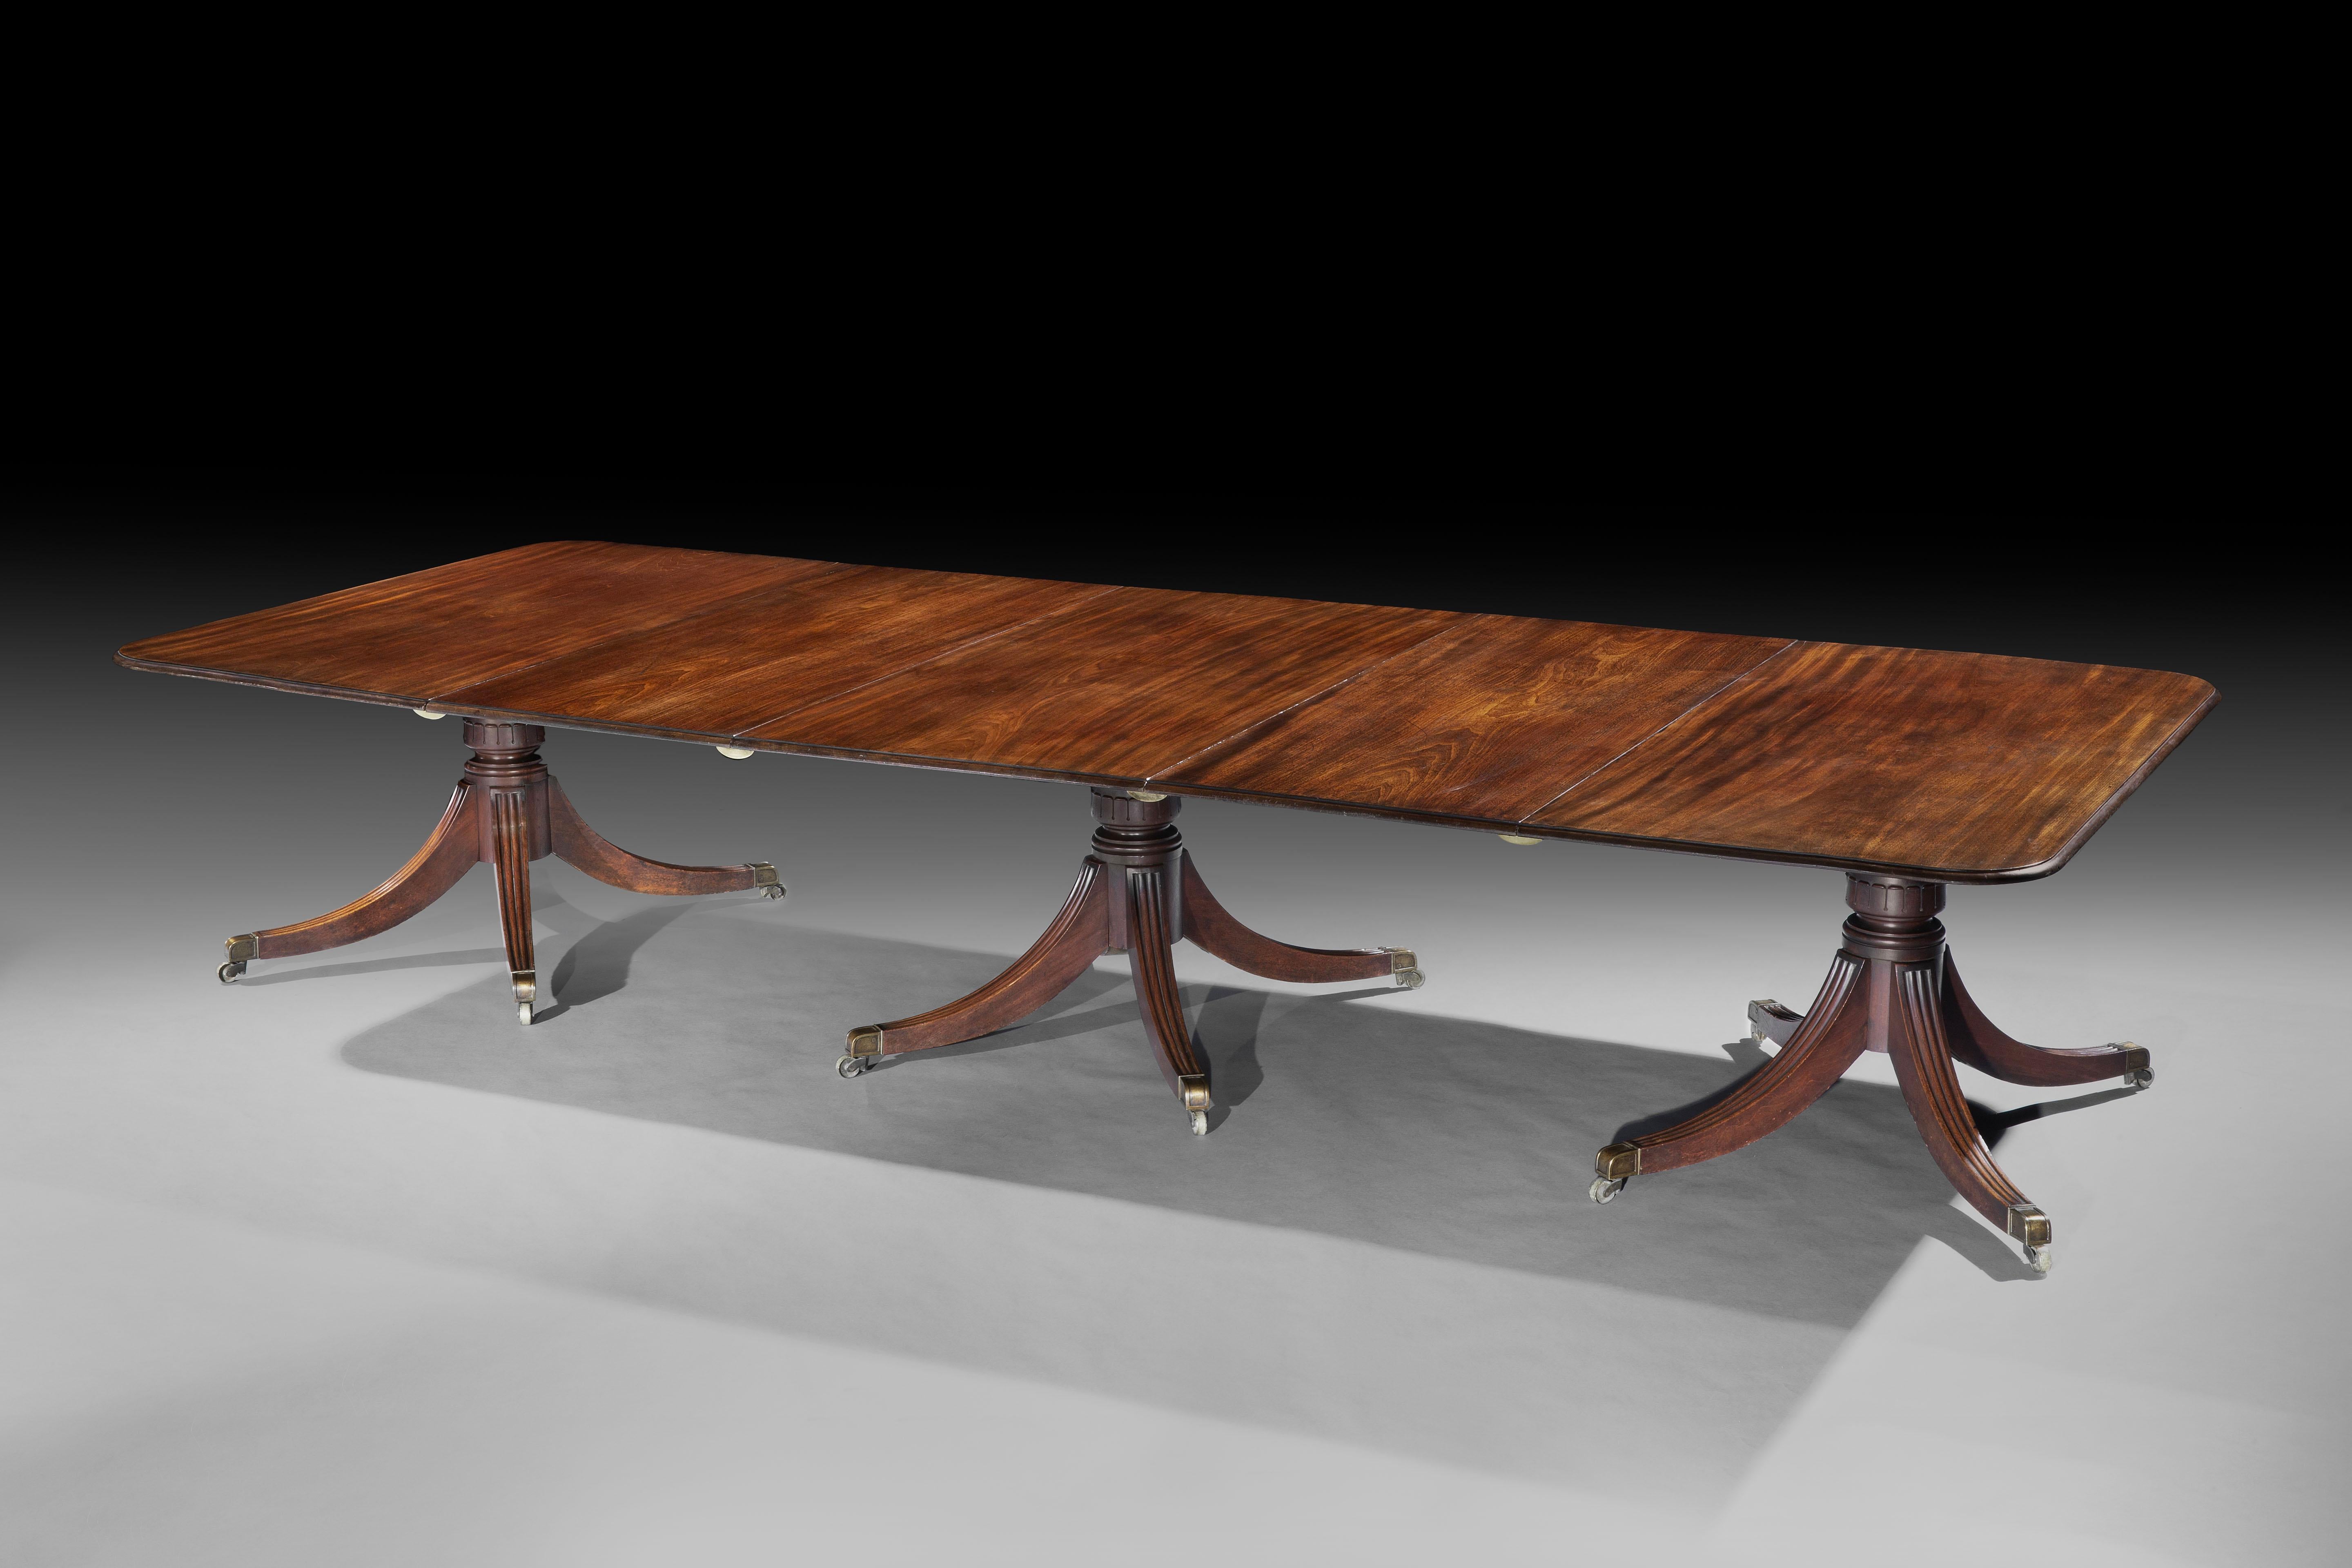 A Fine George IV Mahogany Dining Table

The rectangular figured mahogany top with a moulded edge,
retaining a superb original finish, with two extra leaves,
resting on three column supports, with carved lotus leaf stems
and four shoot of reeded